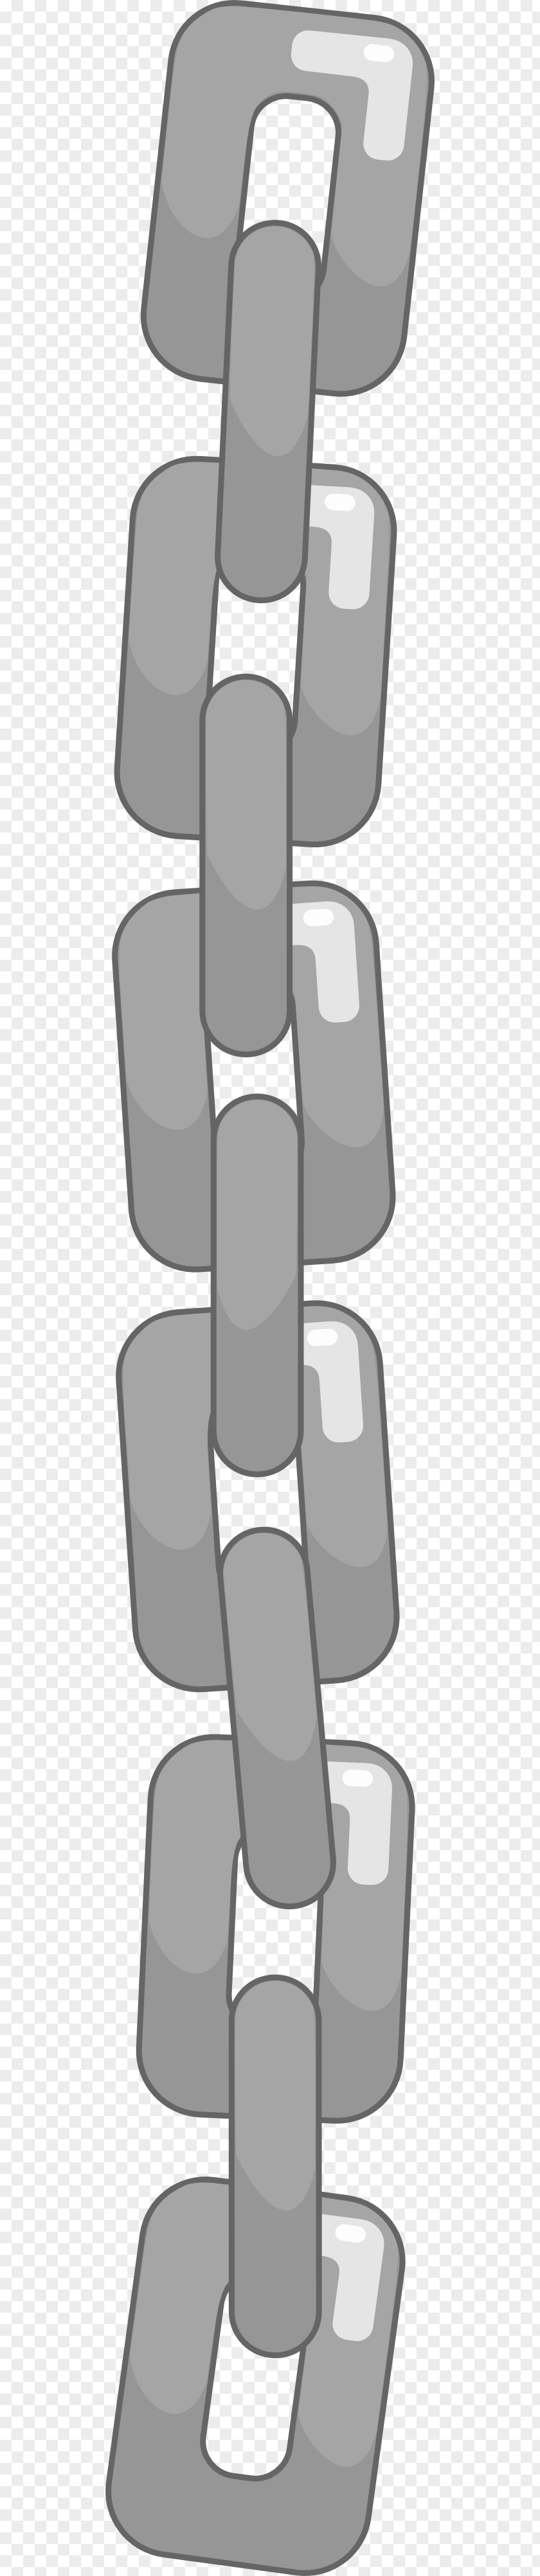 Chain Clip Art Image Vector Graphics PNG